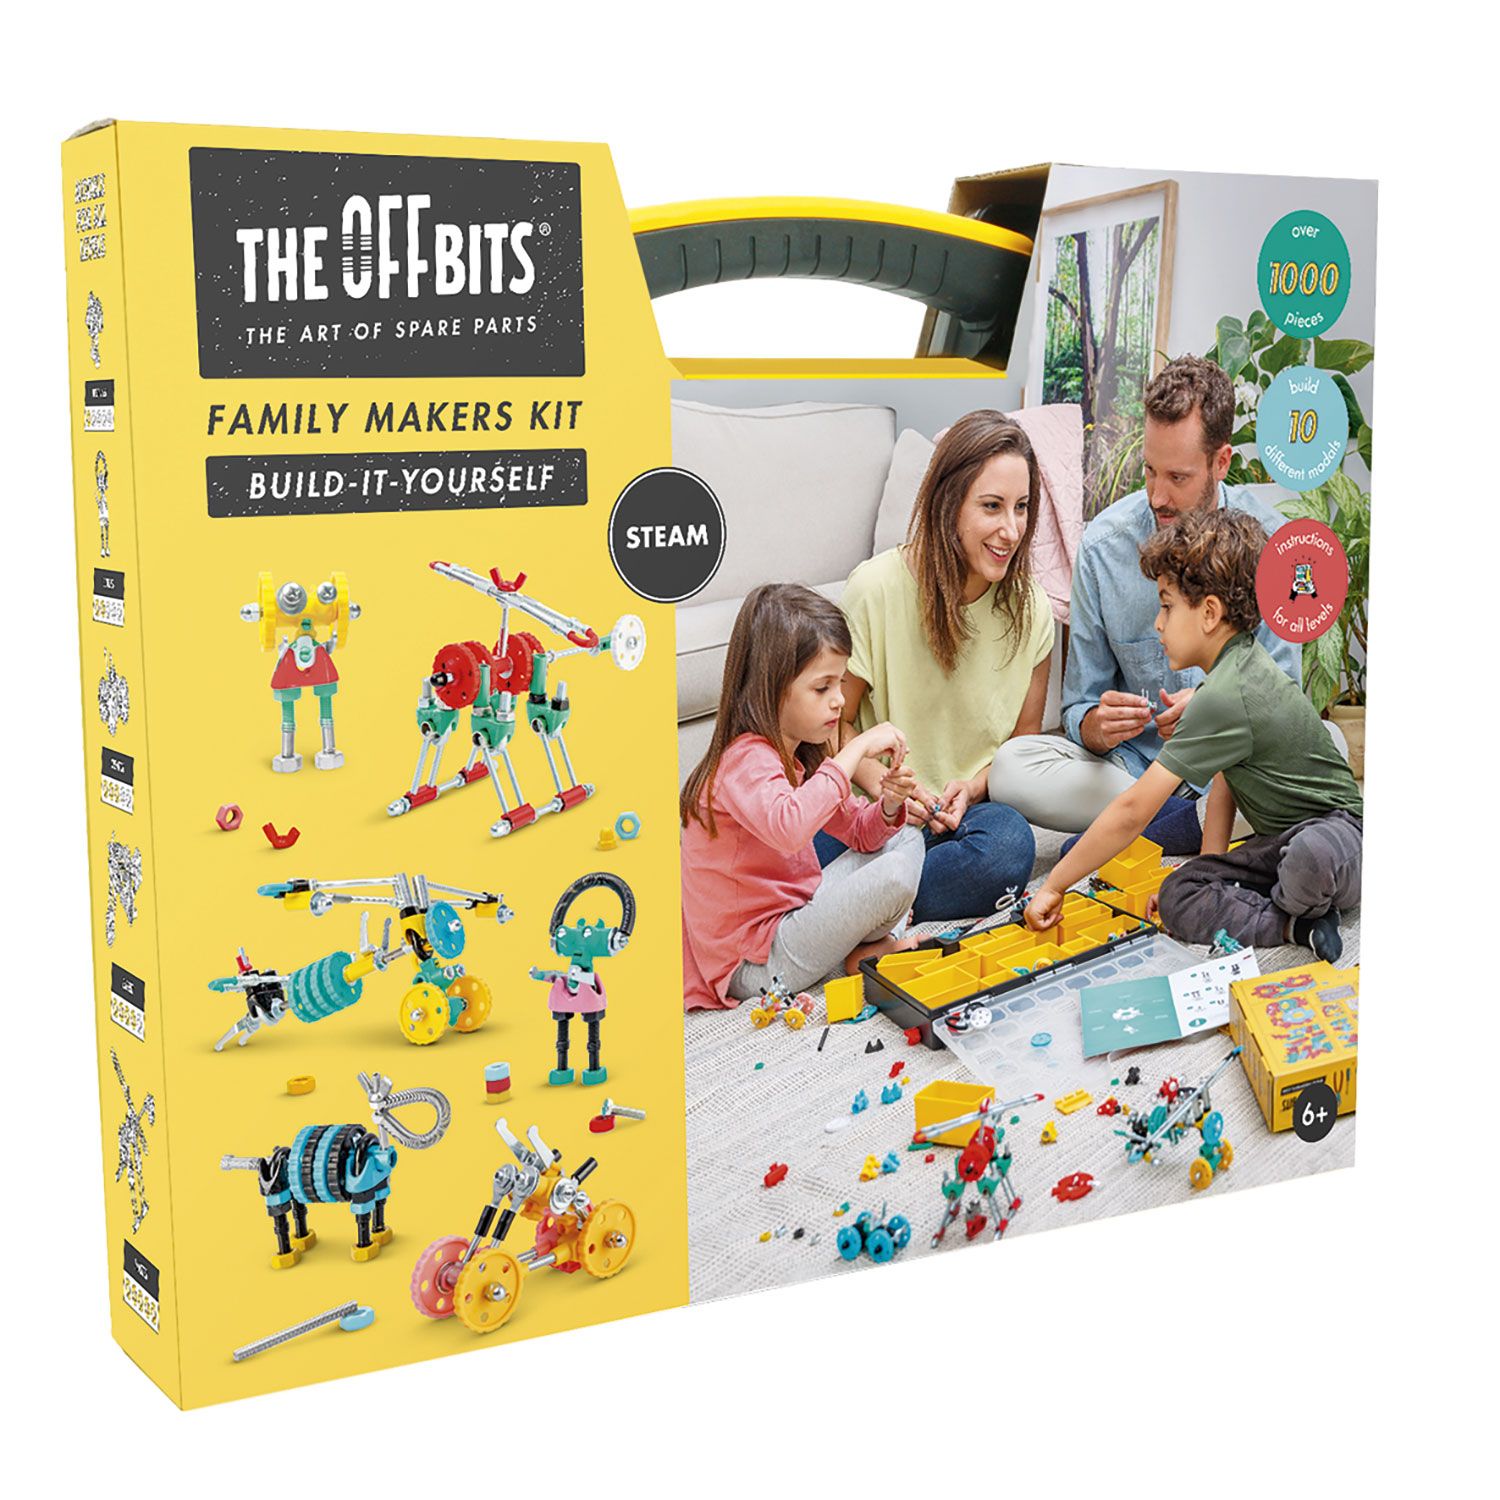 Family Makers Kit, more than 1000 parts